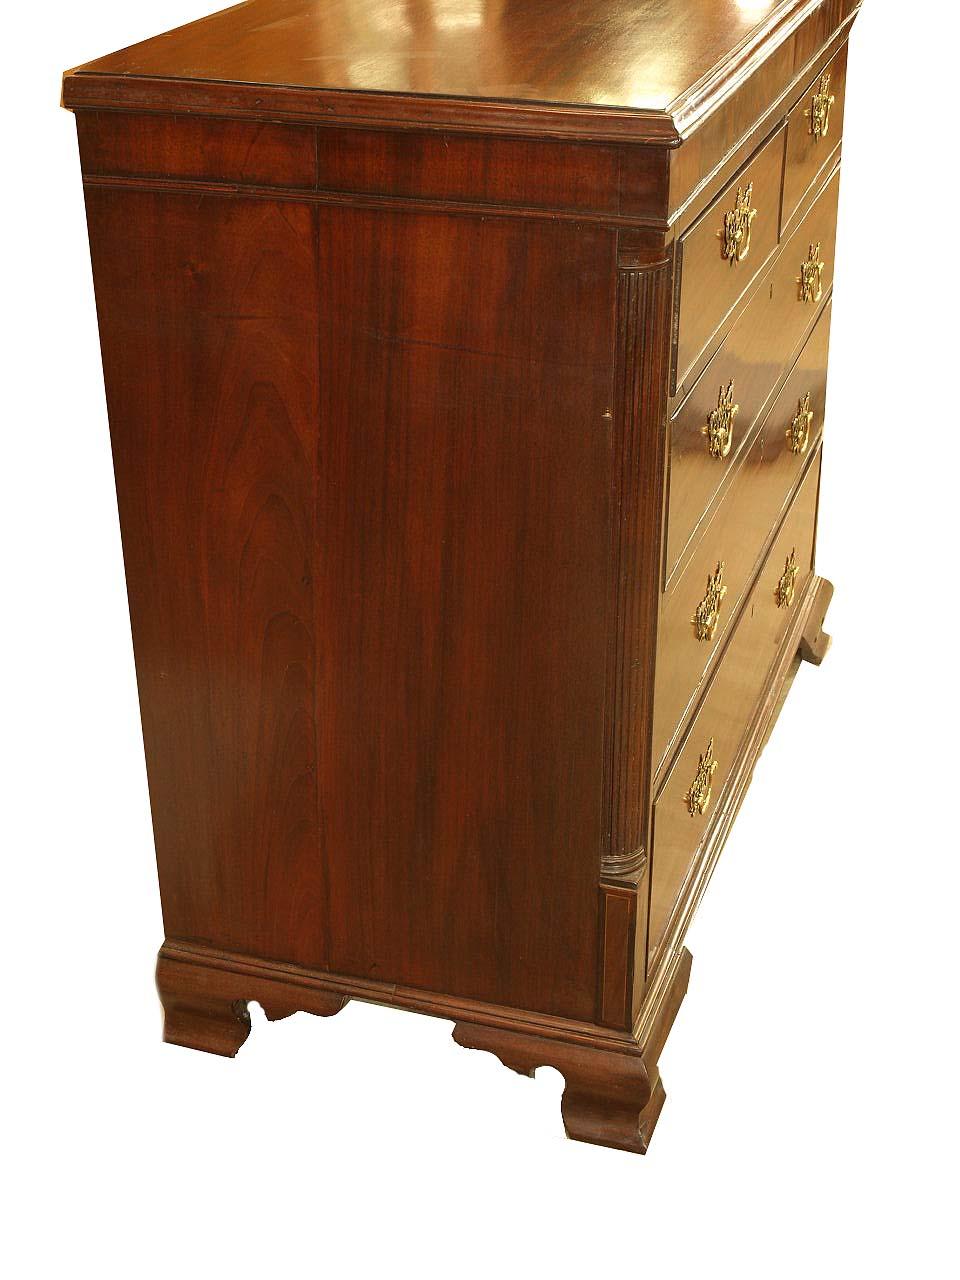 English Chippendale chest, the two over three drawers with open fretwork brass pulls, reeded quarter column terminates with inlaid plinth. The chest rests on ogee bracket feet.